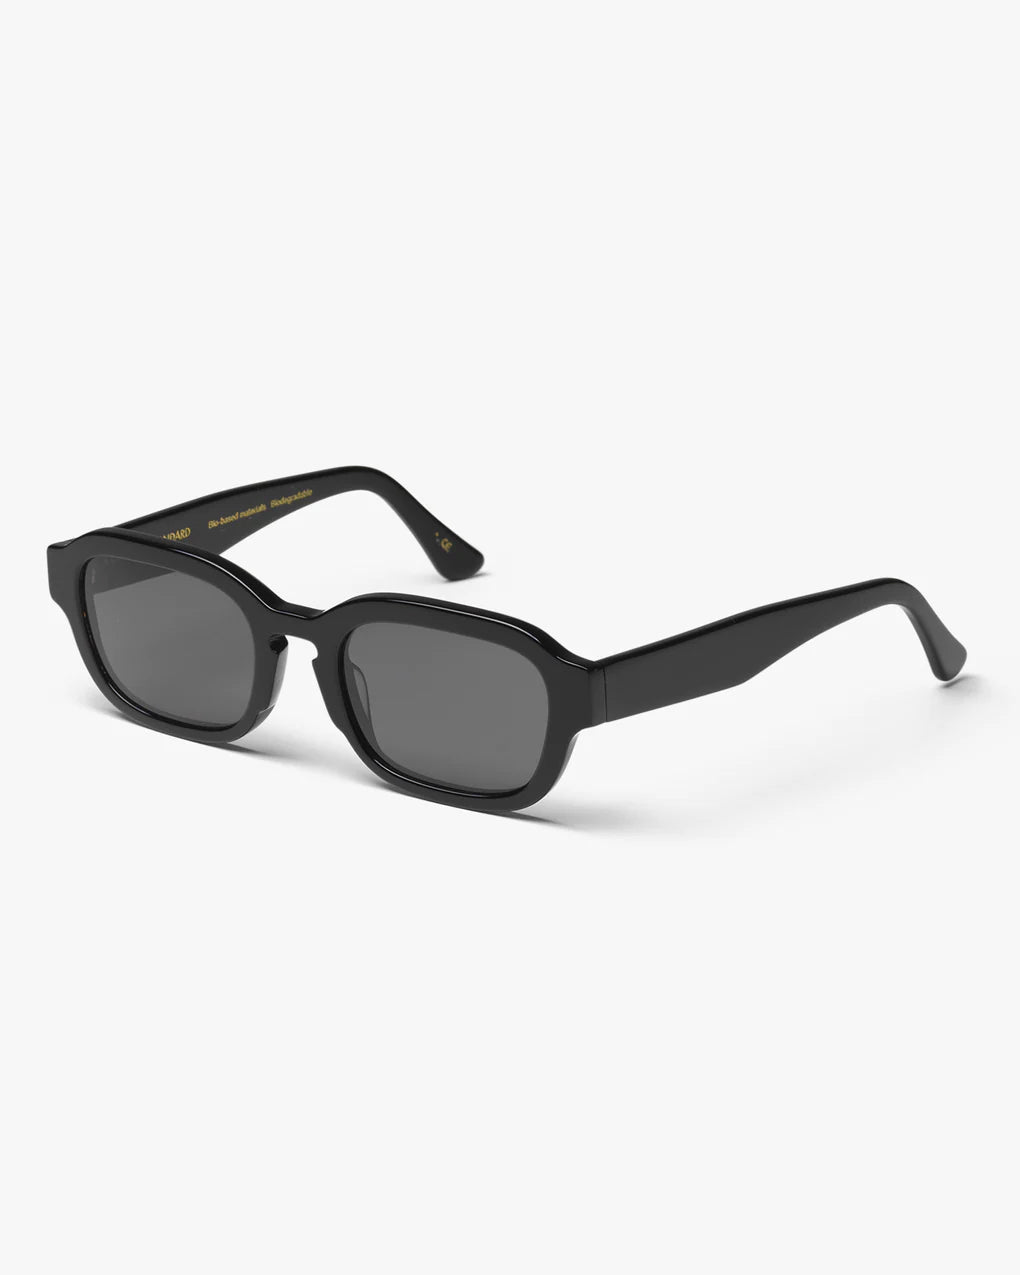 A pair of Colorful Standard Sunglass 01 - Deep Black with UV400 protection on a white background.